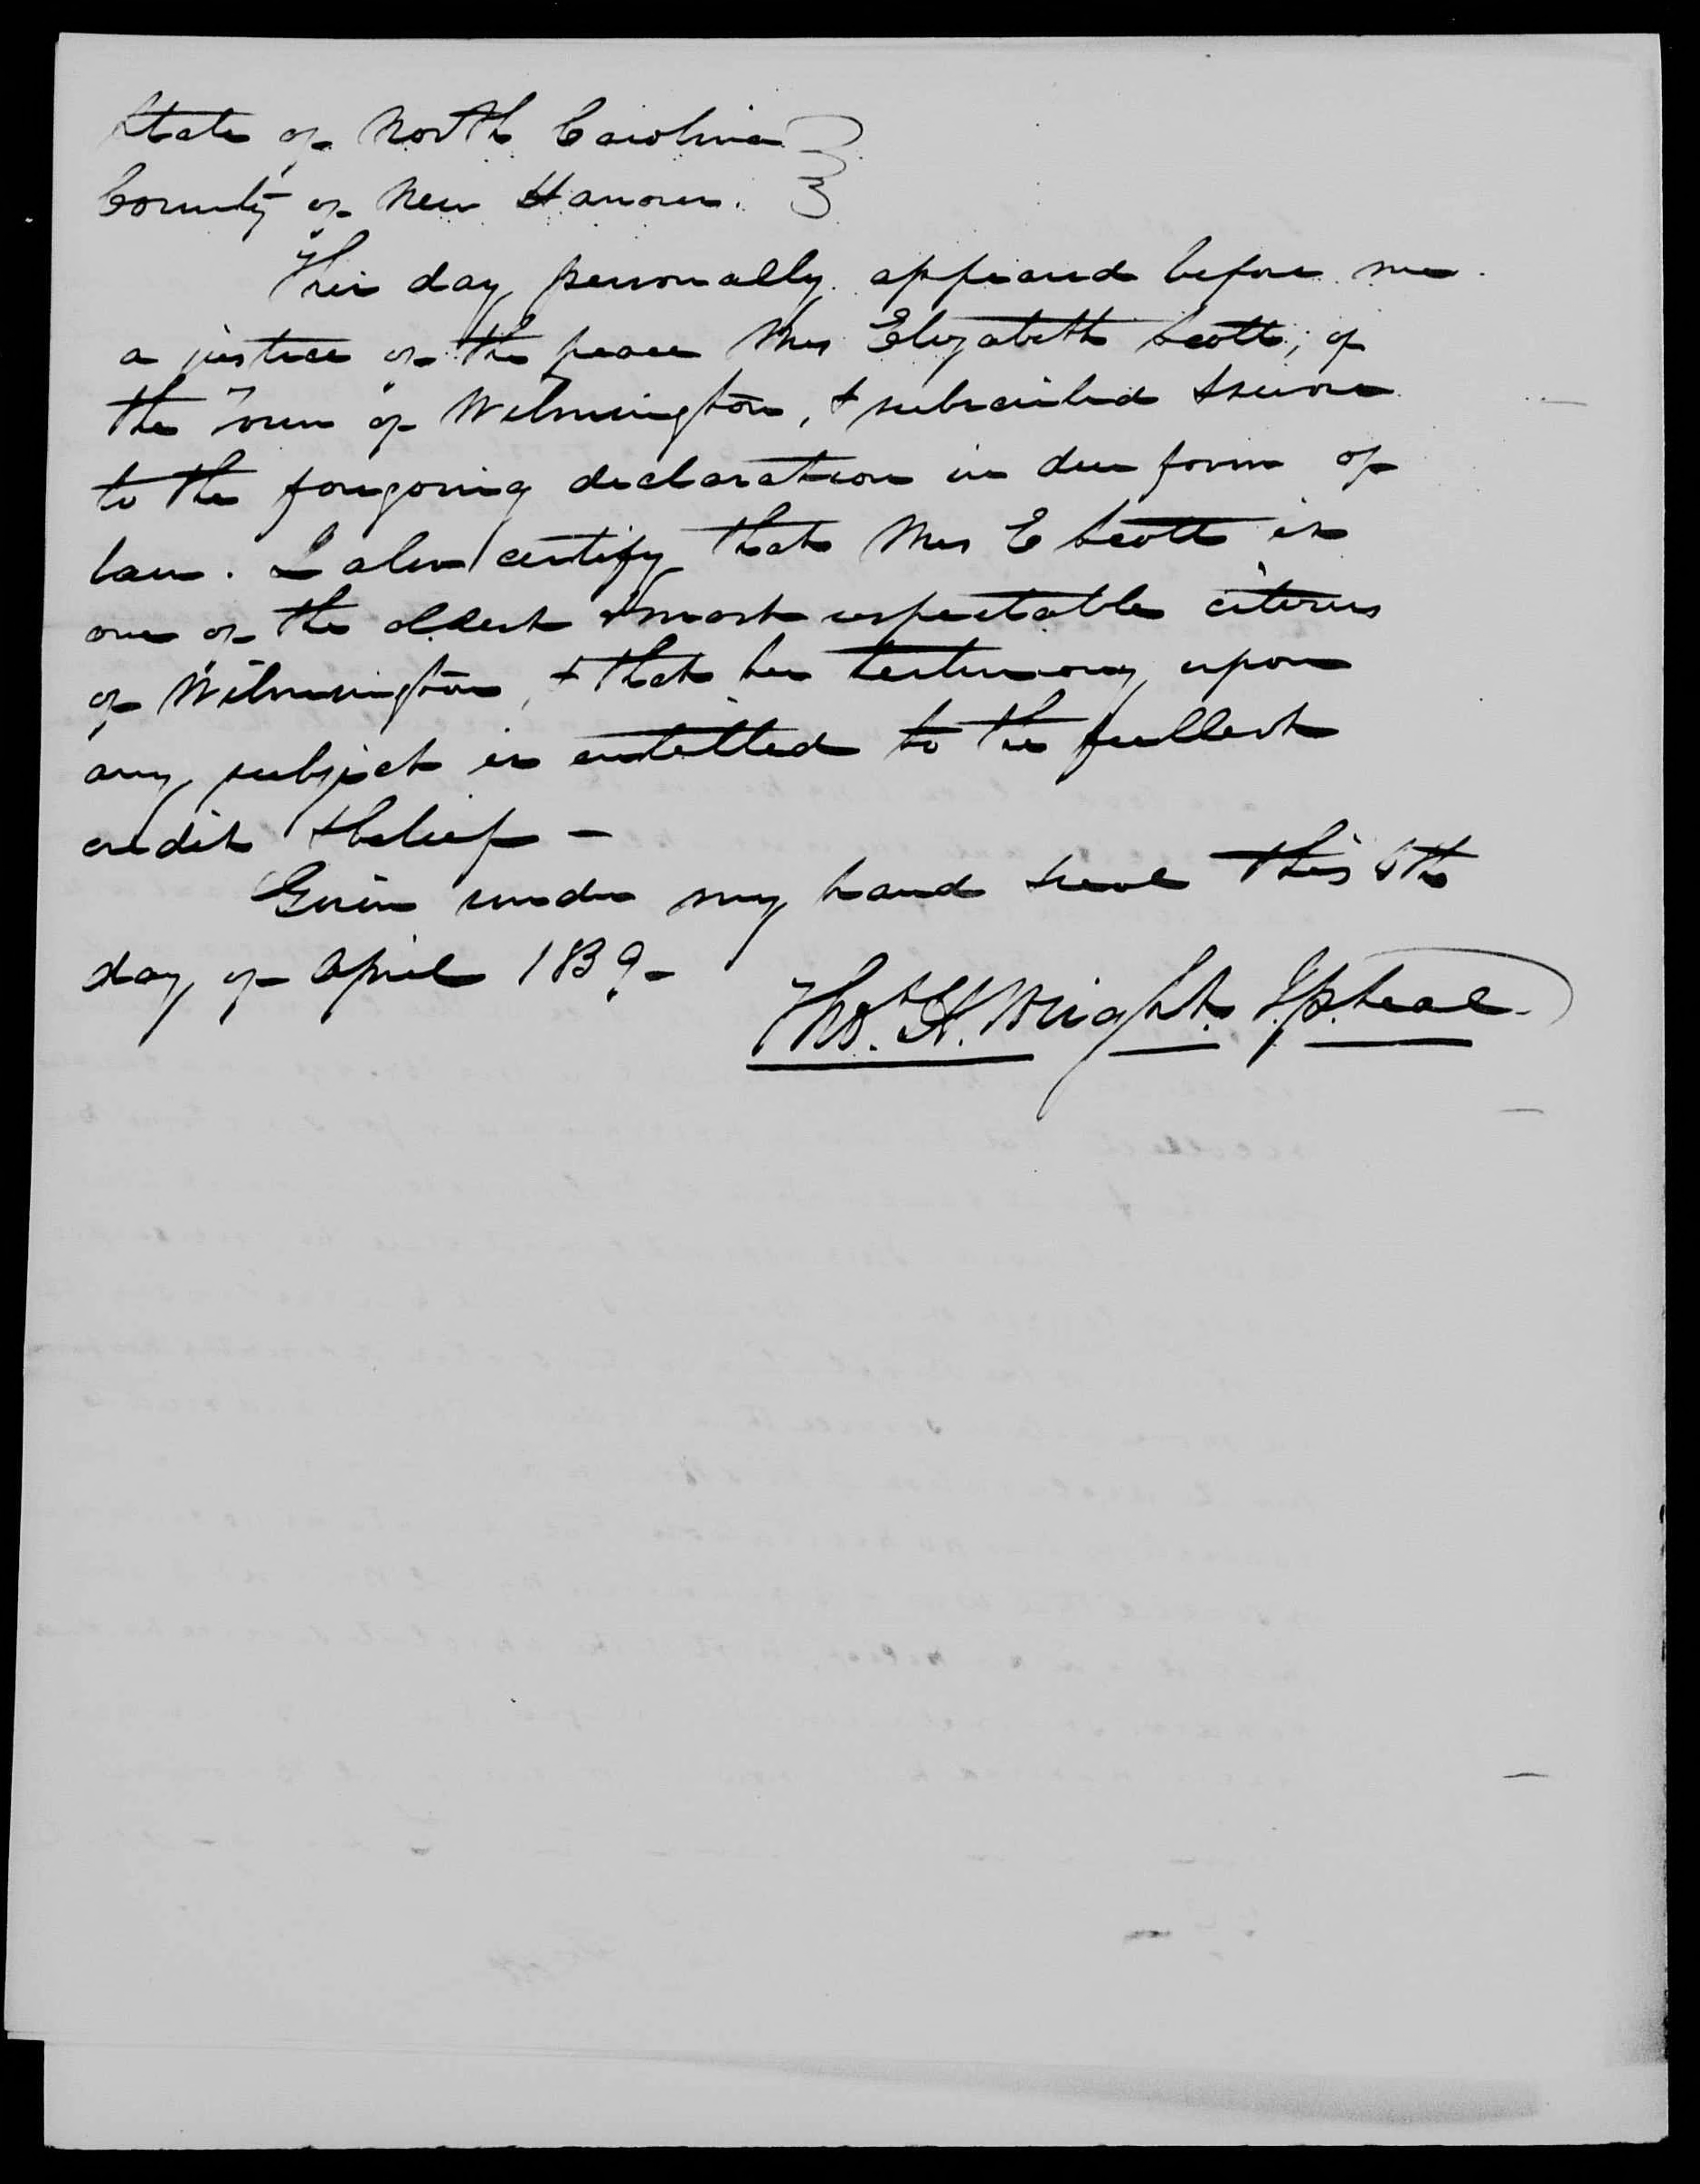 Affidavit of Elizabeth Scott in support of a Pension Claim for Lucy Brown, 6 April 1839, page 2